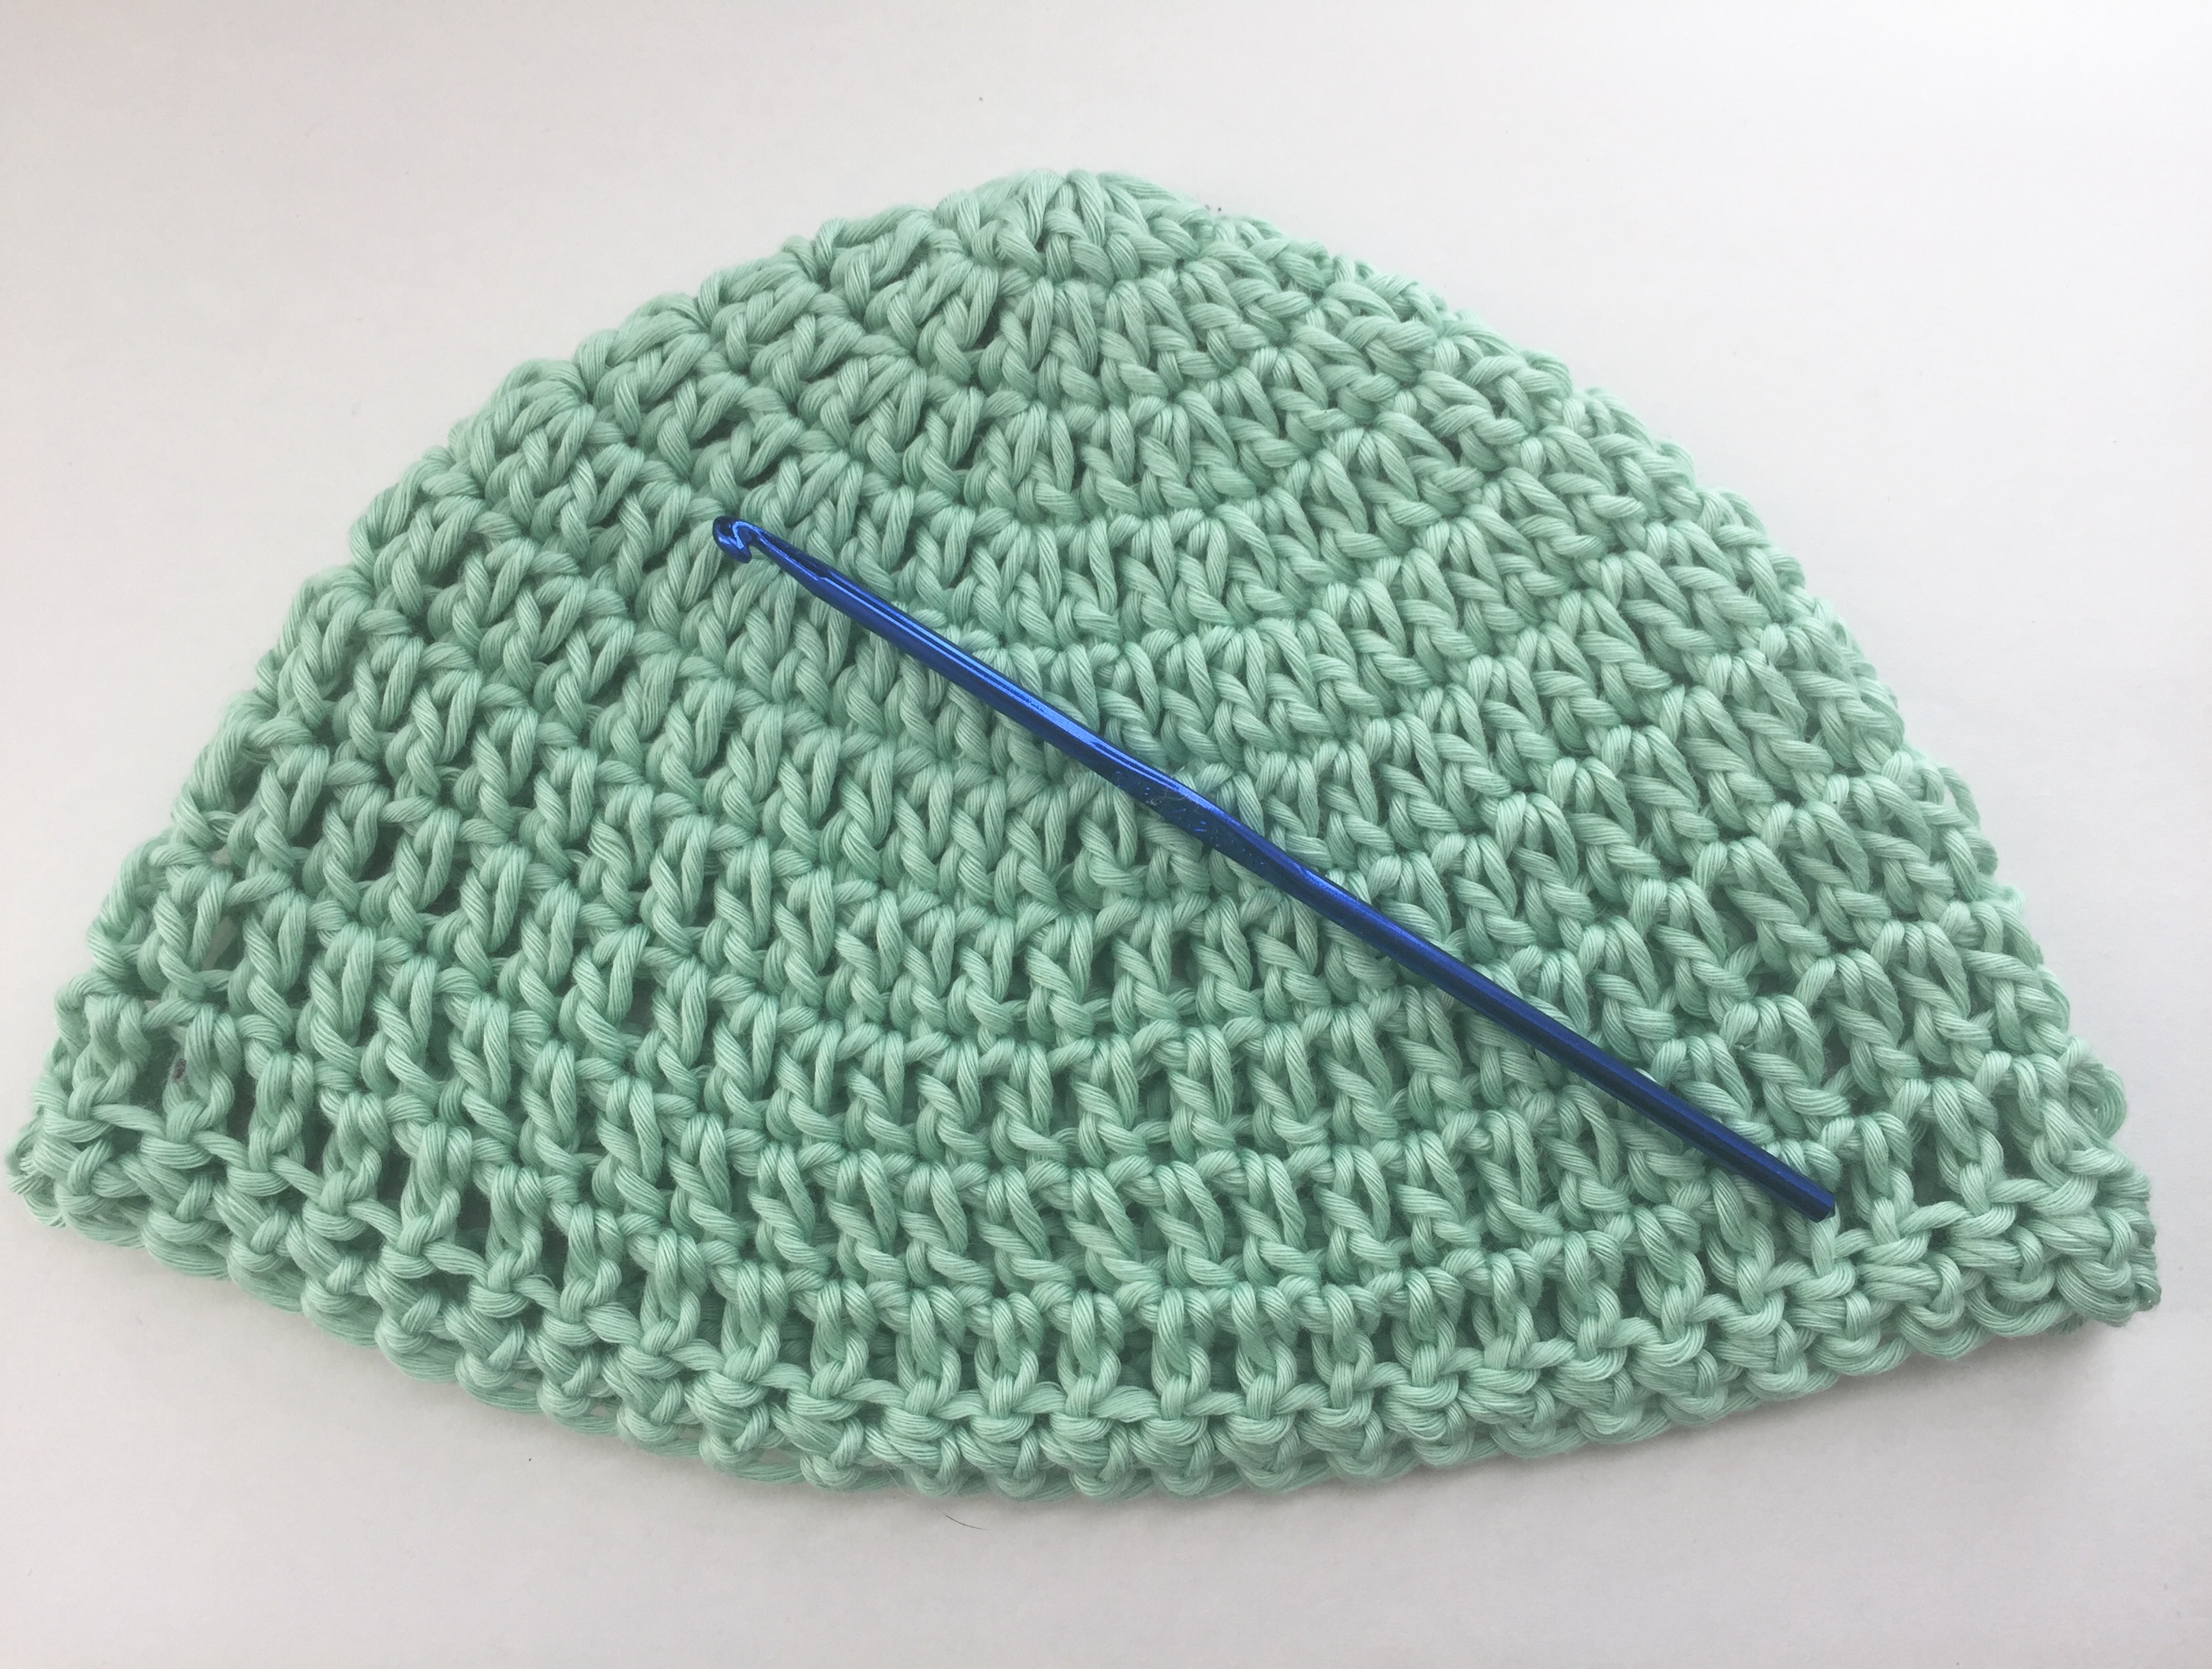 69+ Creative Patterns of Crochet Baby Hats | Guide Patterns